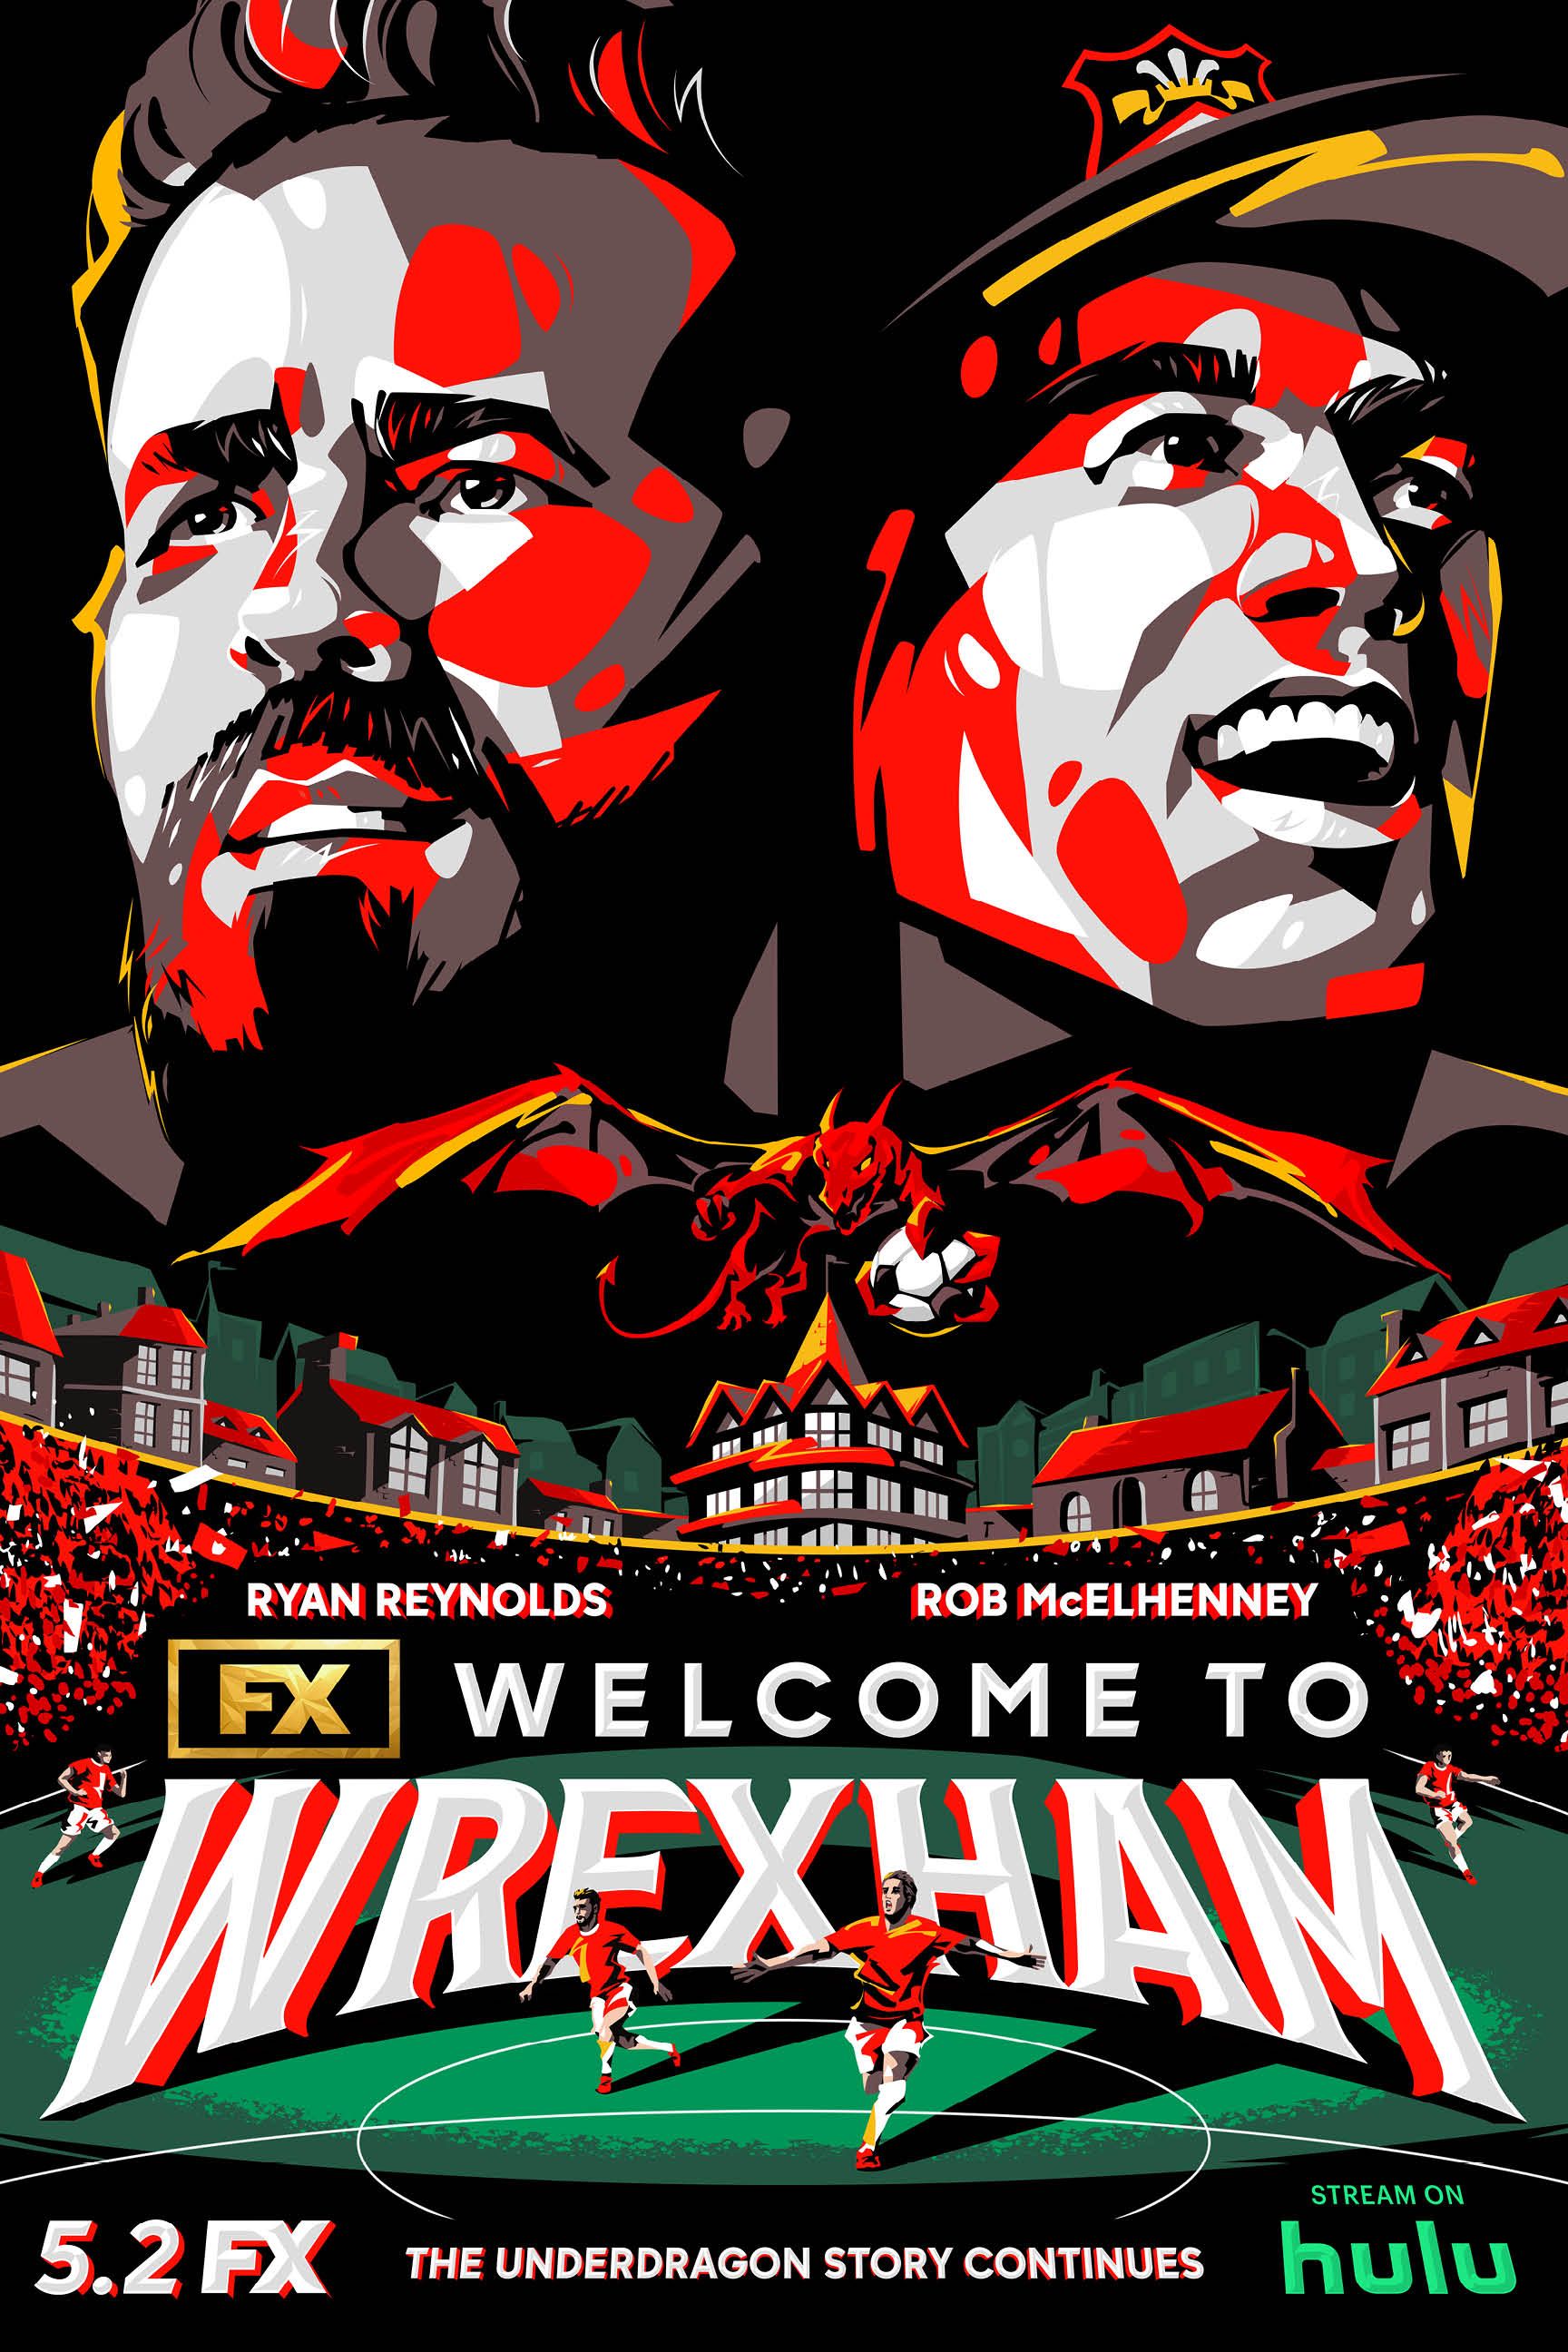 FXs Welcome to Wrexham Season 3 poster Featuring Ryan Reynolds and Rob McElhenney